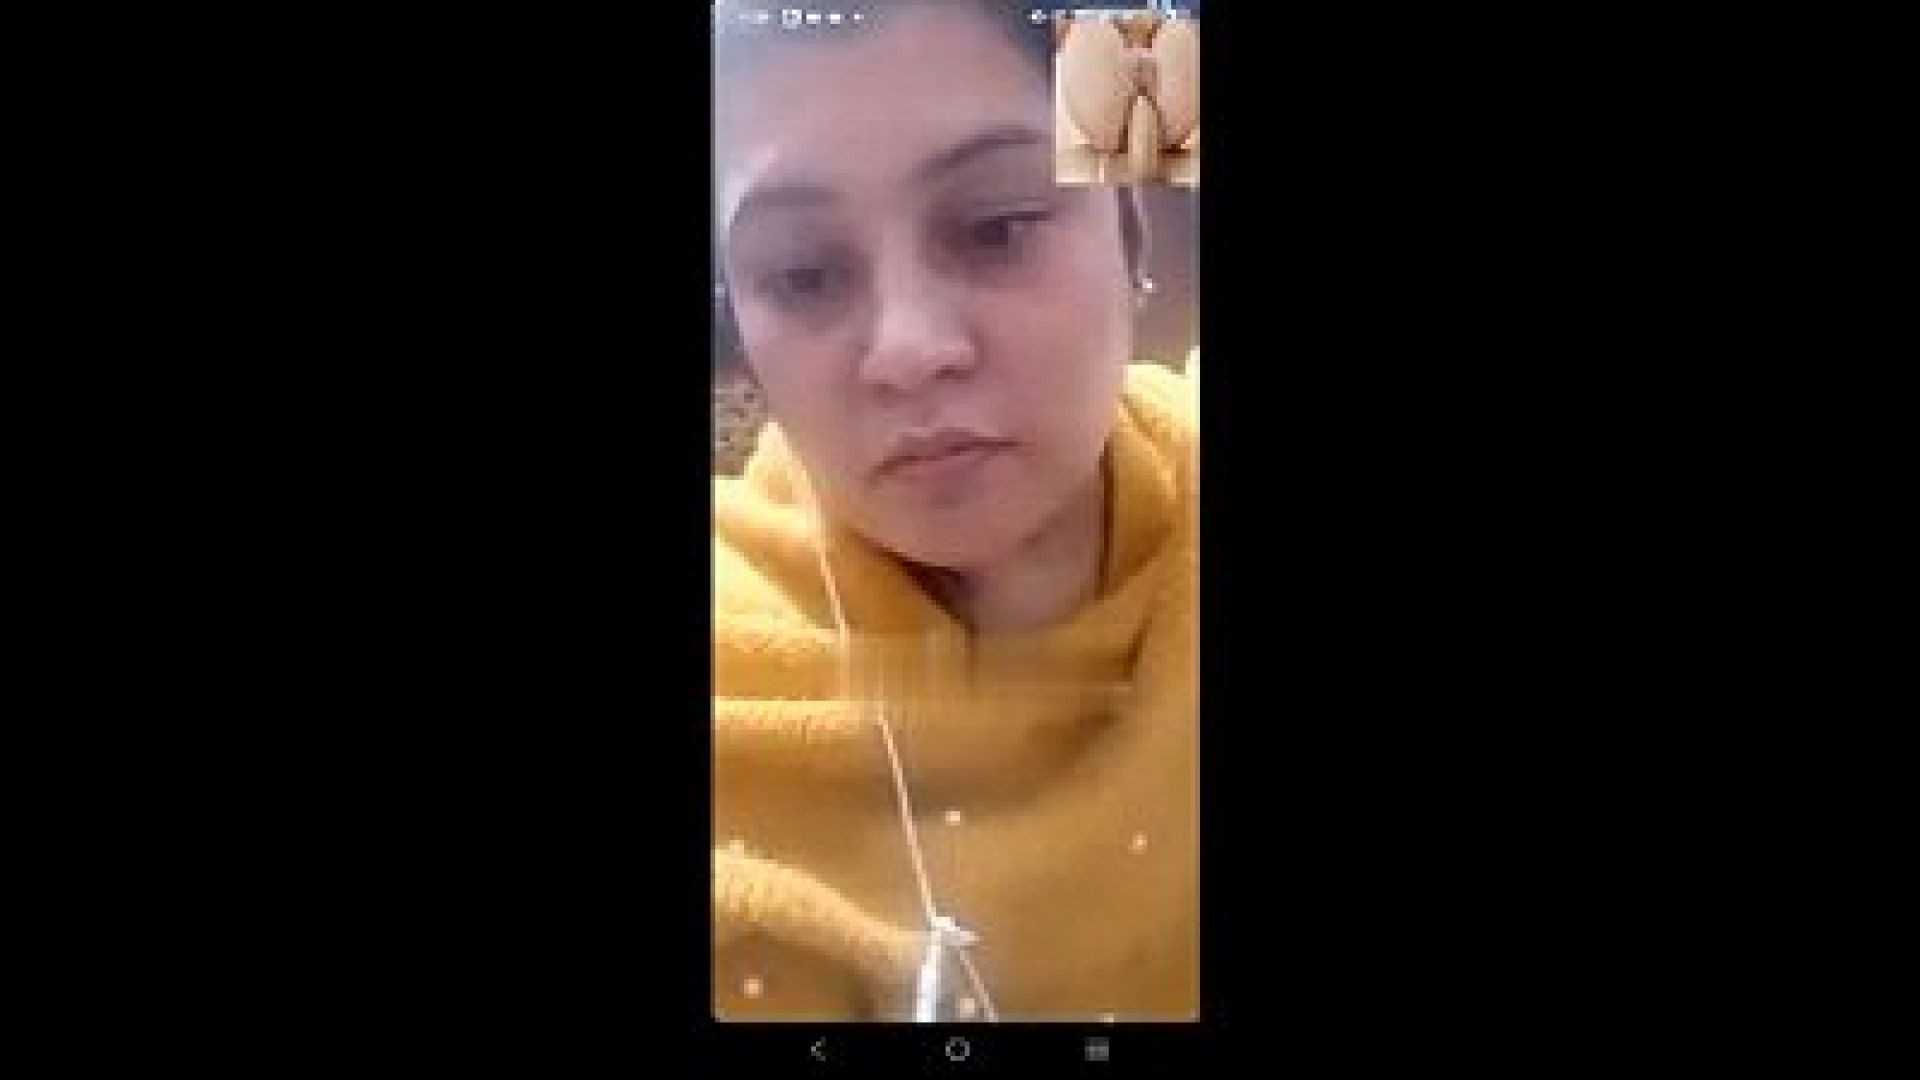 Paki lady showing boobs on video call